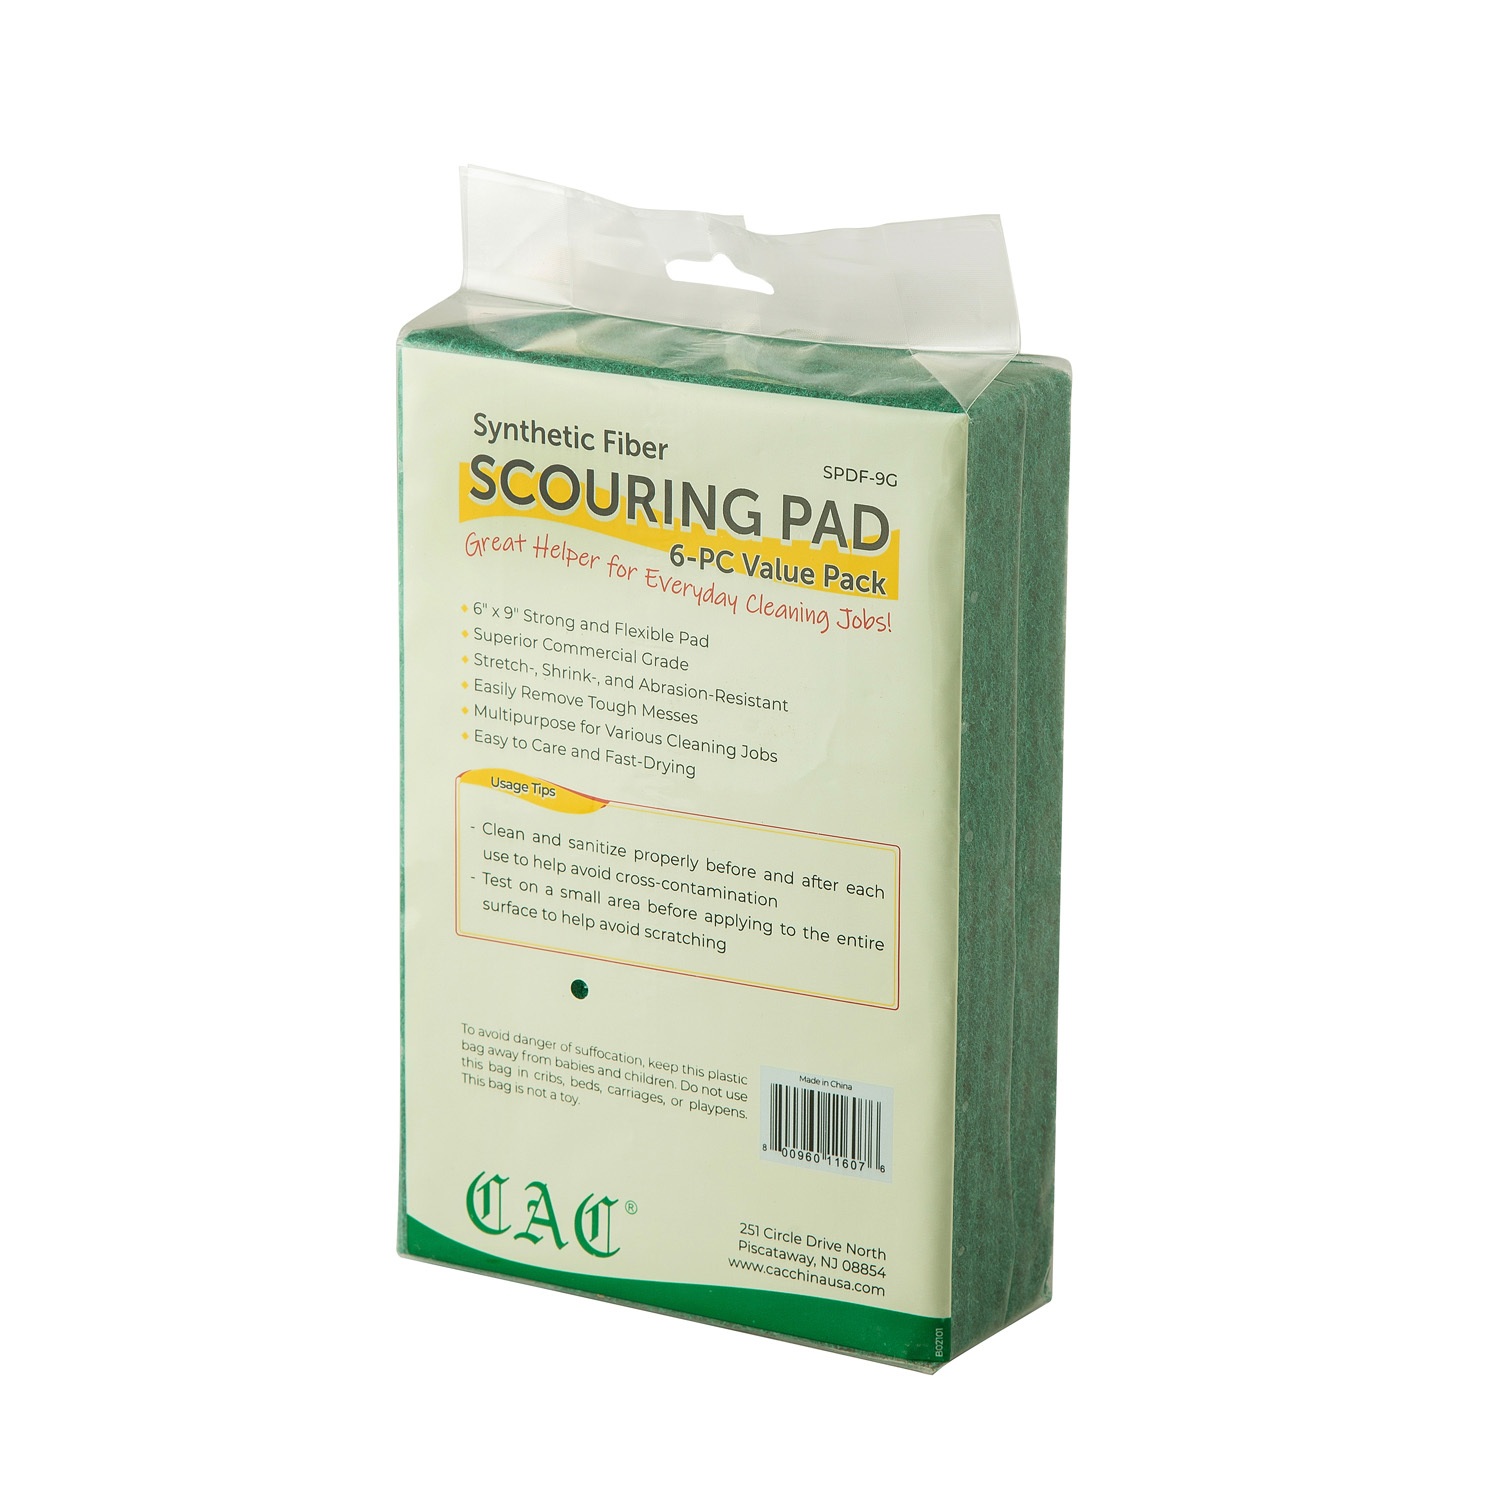 CAC China SPDF-9G Synthetic Fiber Scouring Pad 6" x 9" 6/Pack